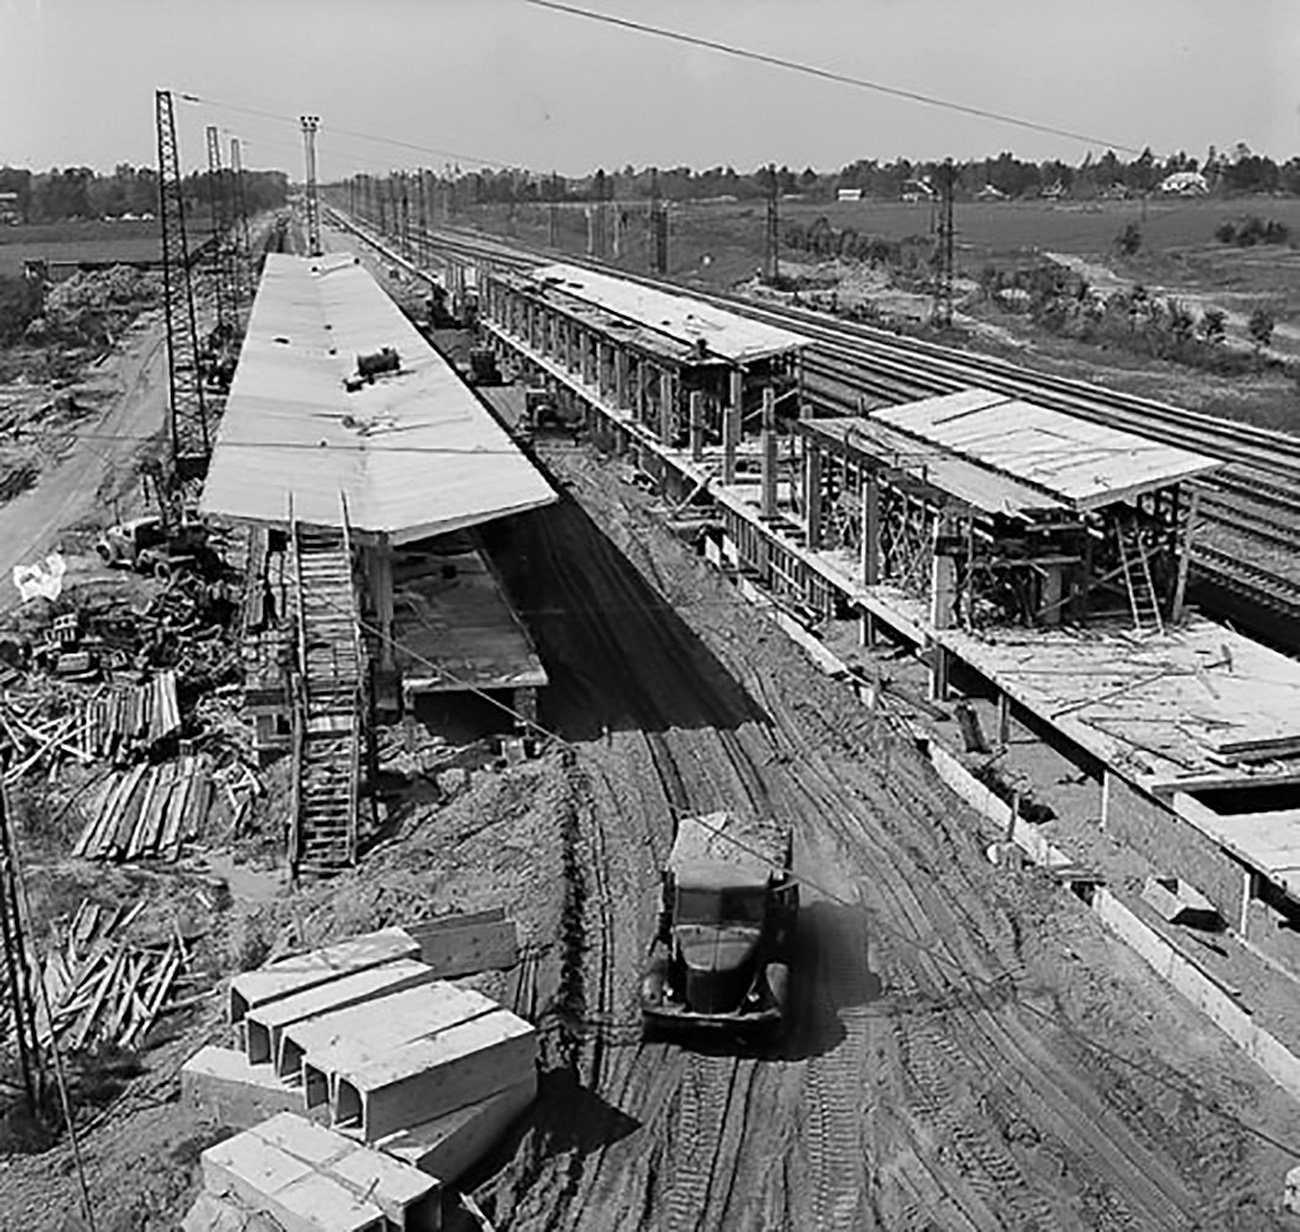 The Moscow Metro, which now counts 206 stations, only raised the pace of construction, and the major transfer points (from the regions to Moscow), through which millions of passengers now pass every day, were just being built less than 50 years ago.  Pictured: Vykhino railway station under construction, 1965